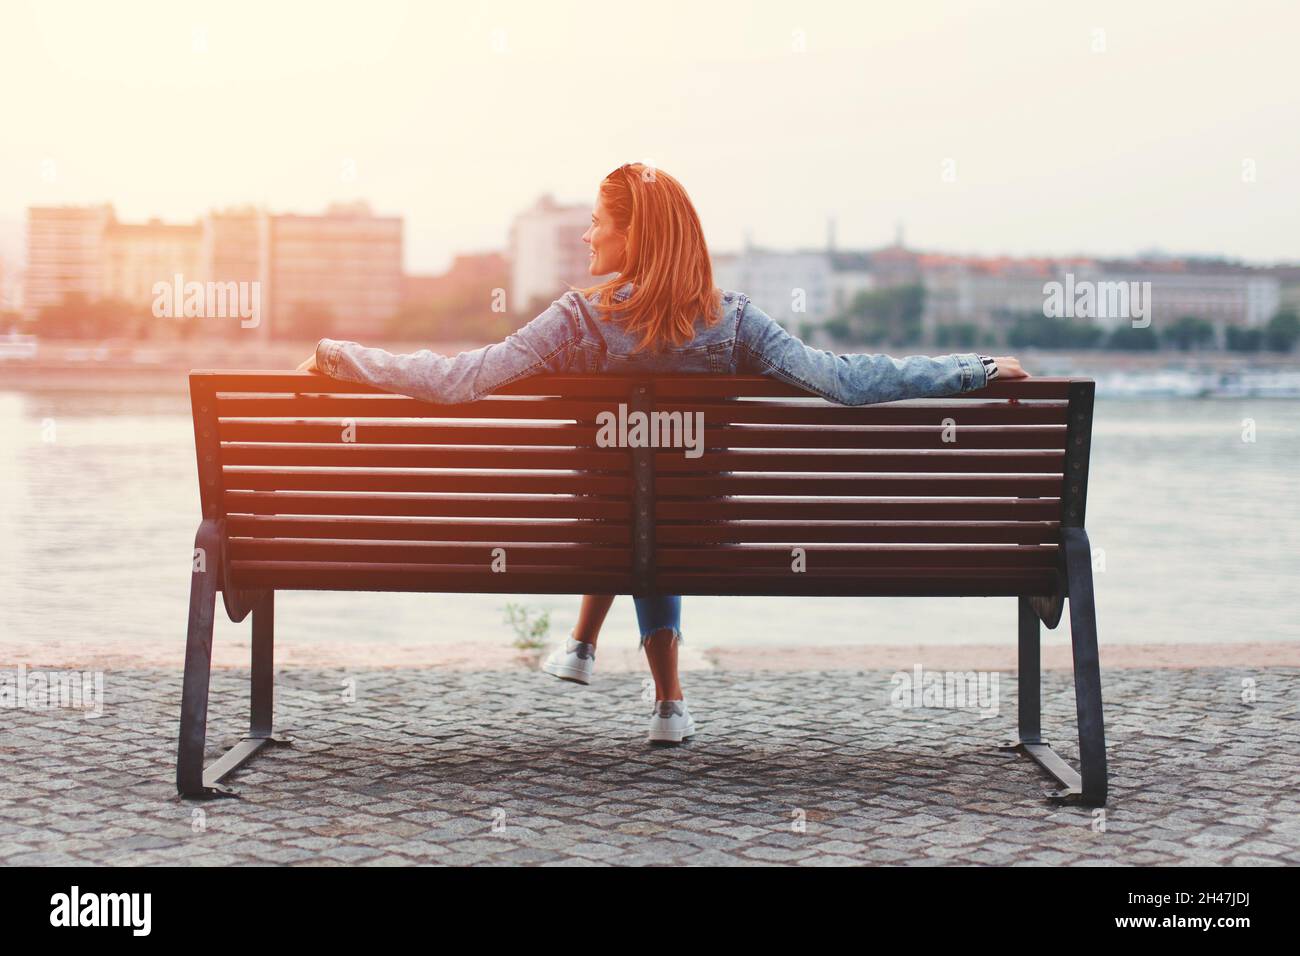 Young redhead woman relaxing on bench at riverside in orange sunrise Stock Photo